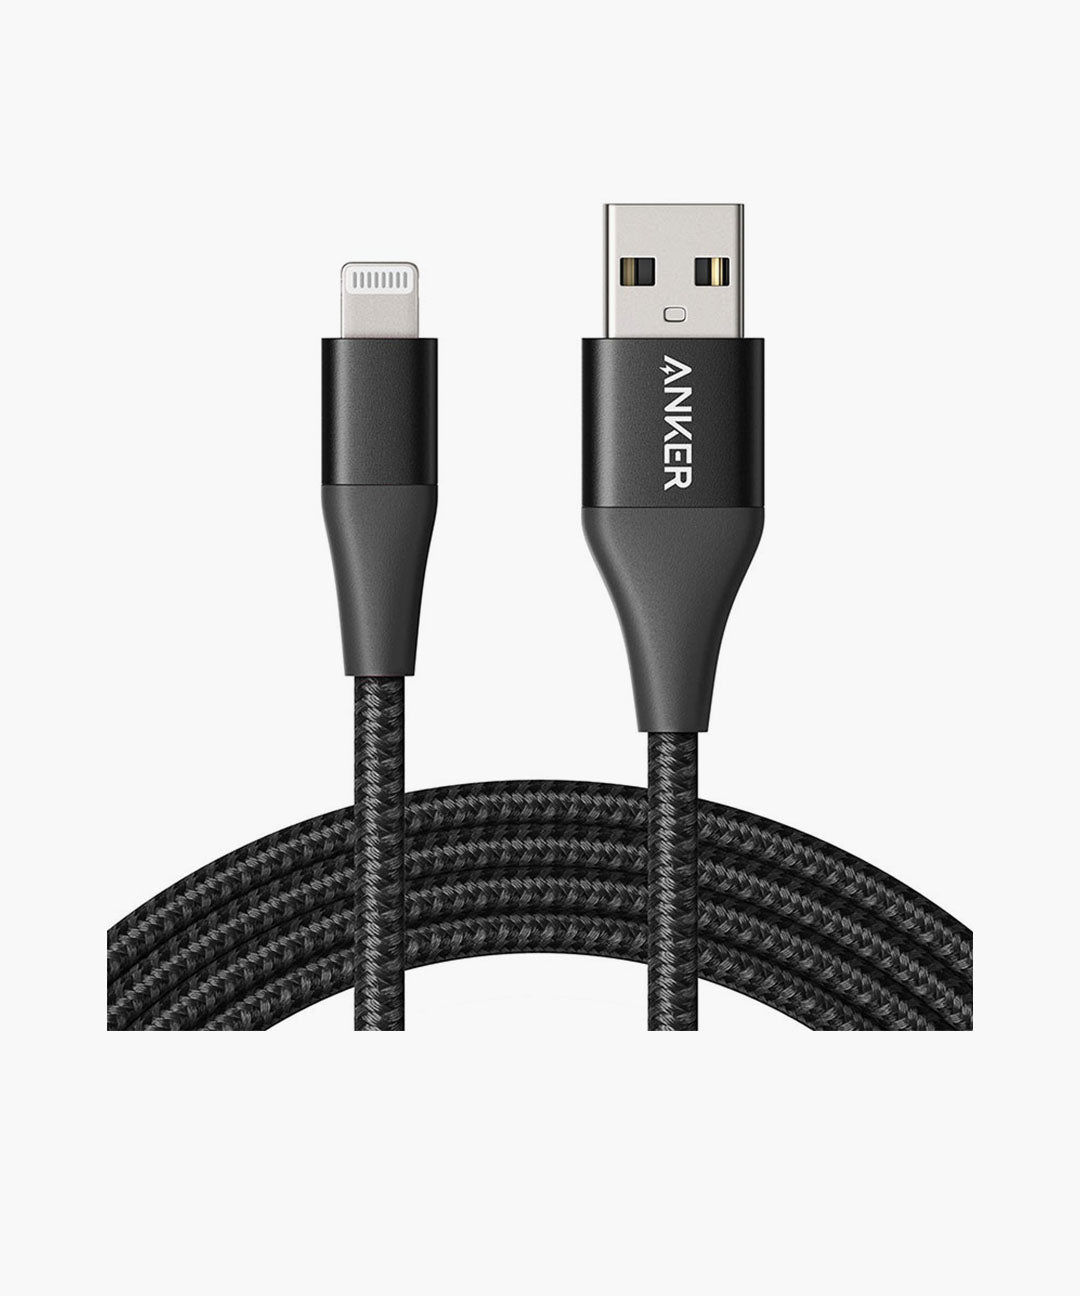 Anker Powerline+ II USB A to Lightning Cable (0.9m/3ft) – Black (A8452H13)